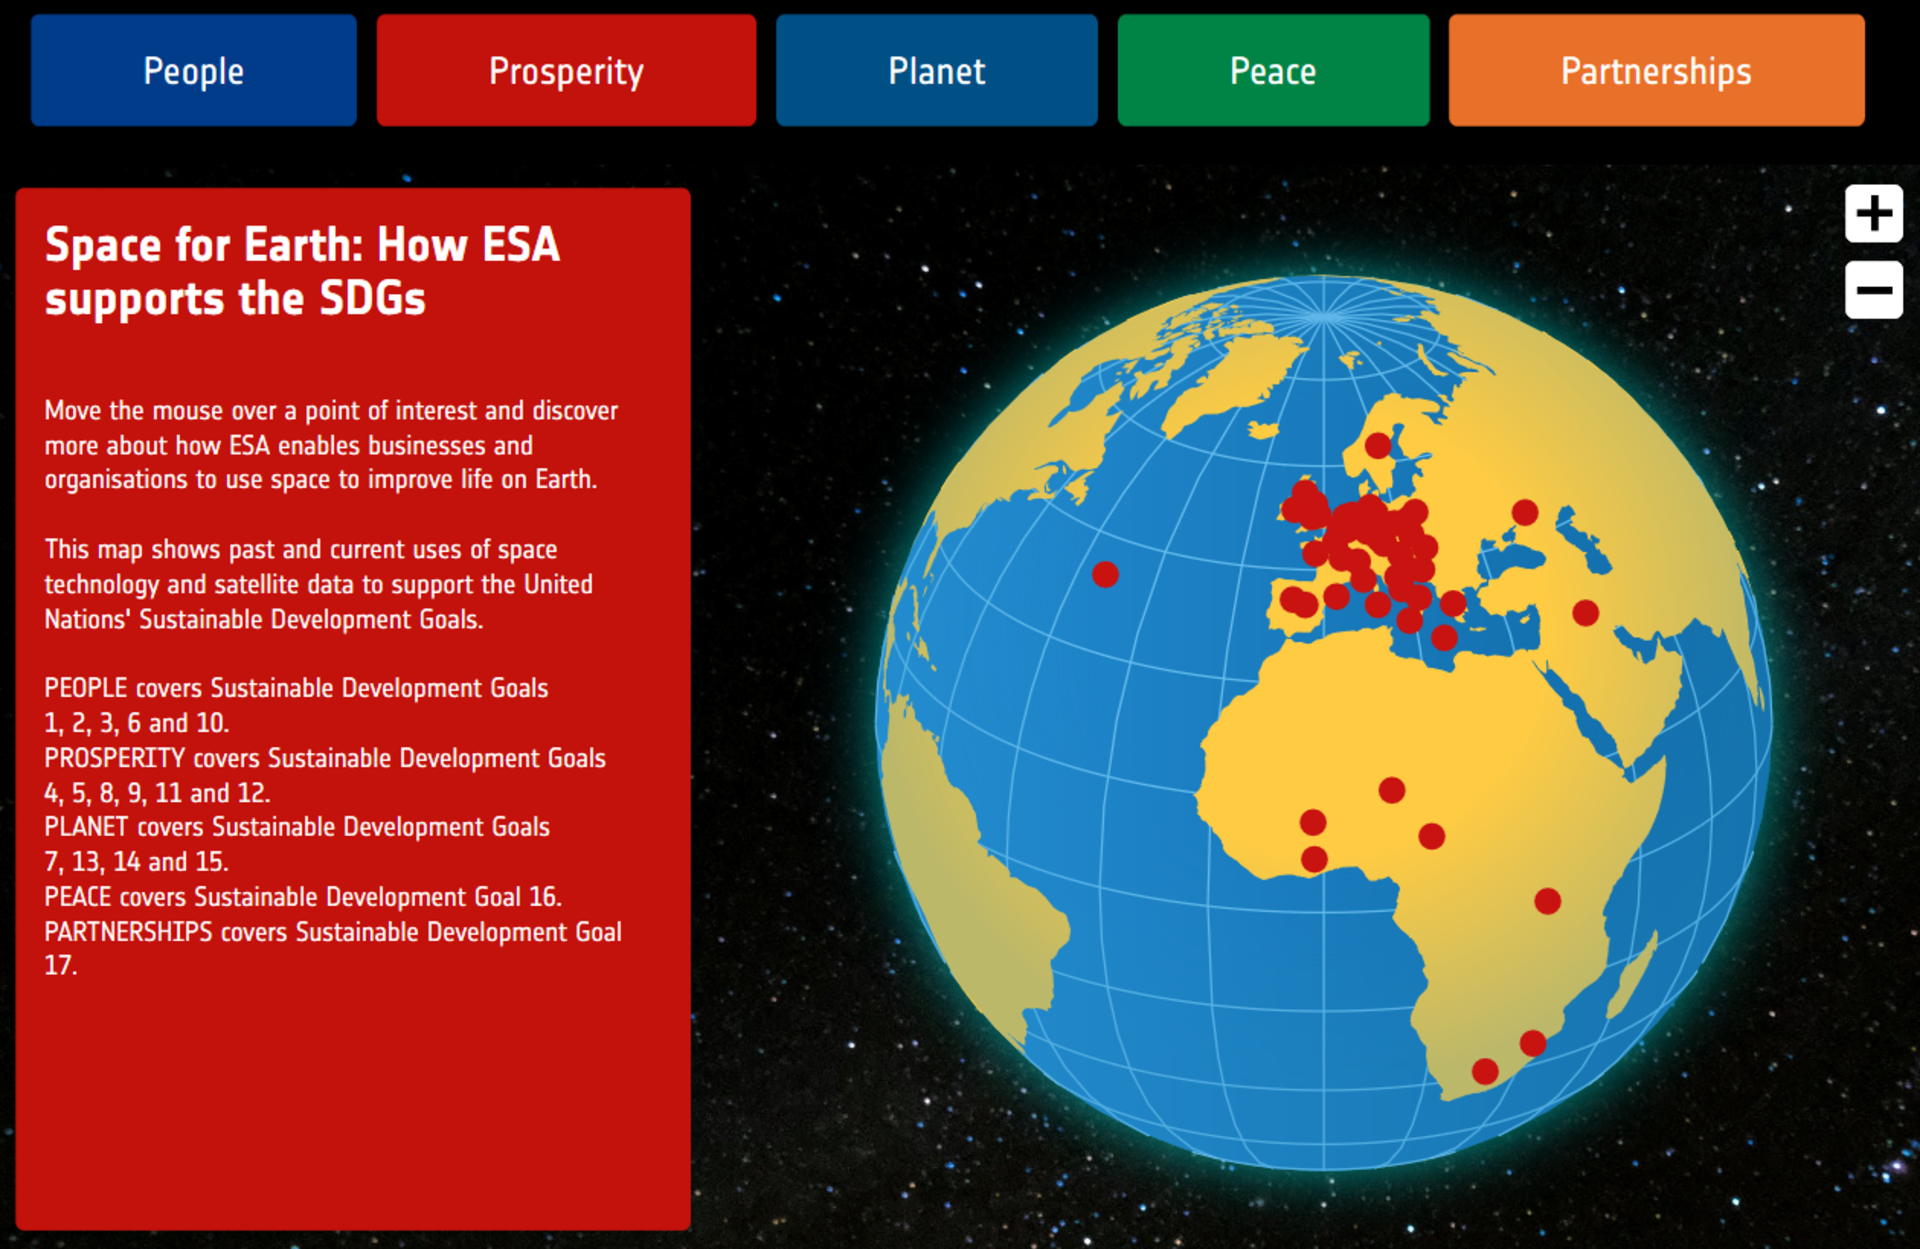 Space for Earth: How ESA supports the SDGs